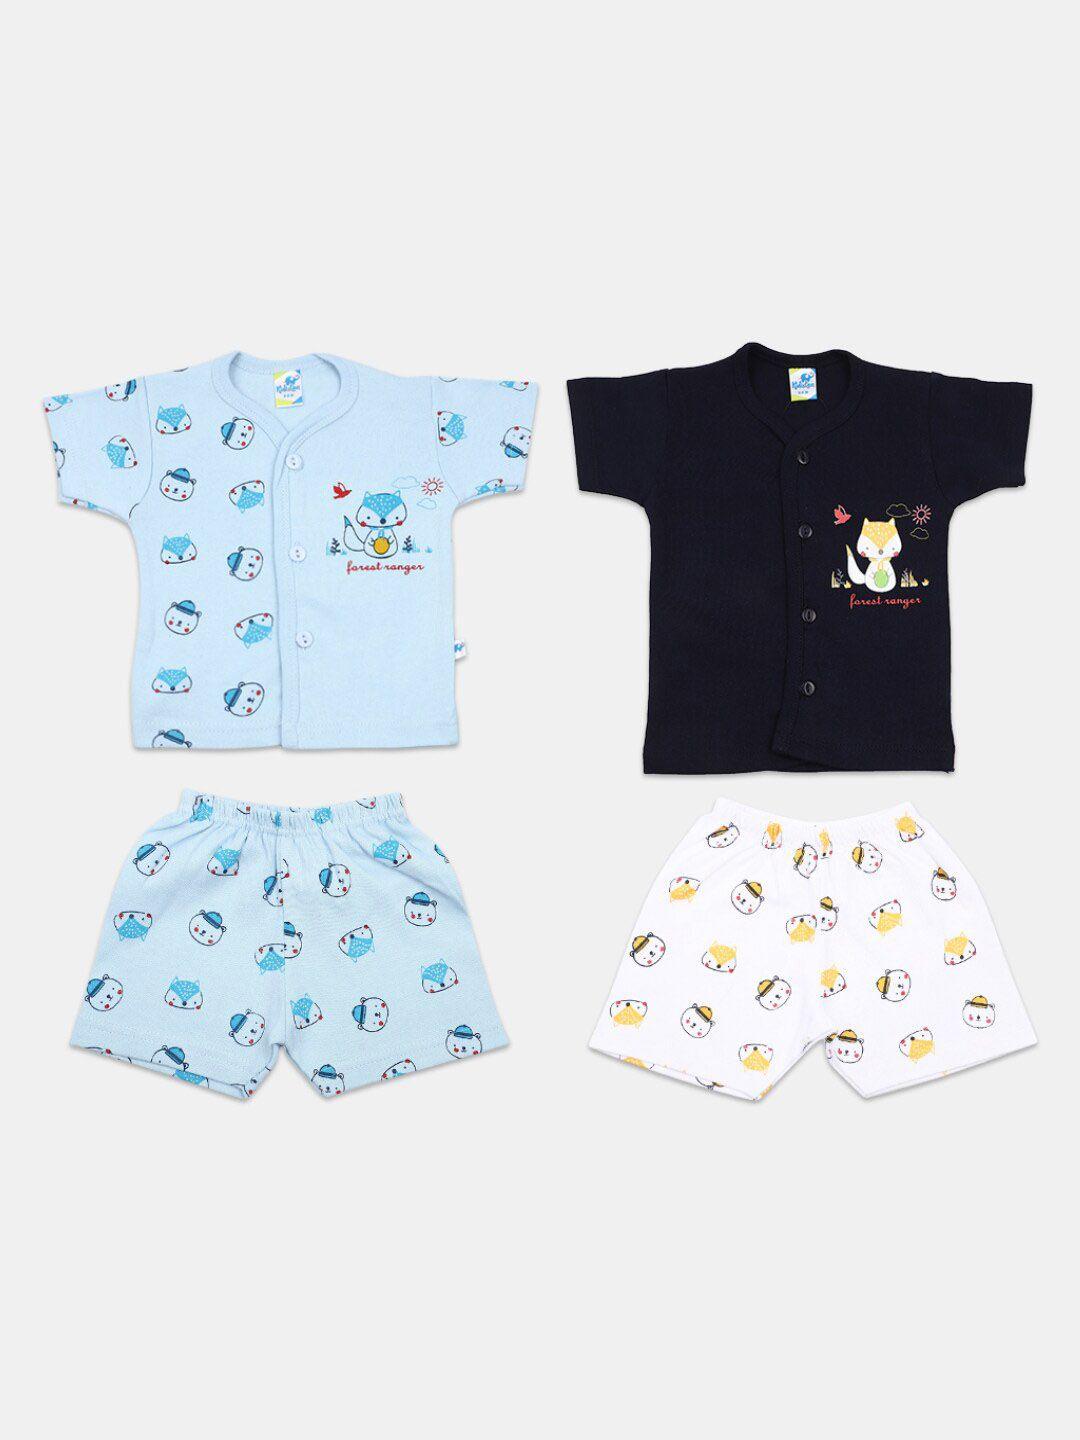 v-mart infants pack of 2 printed pure cotton t-shirts with shorts